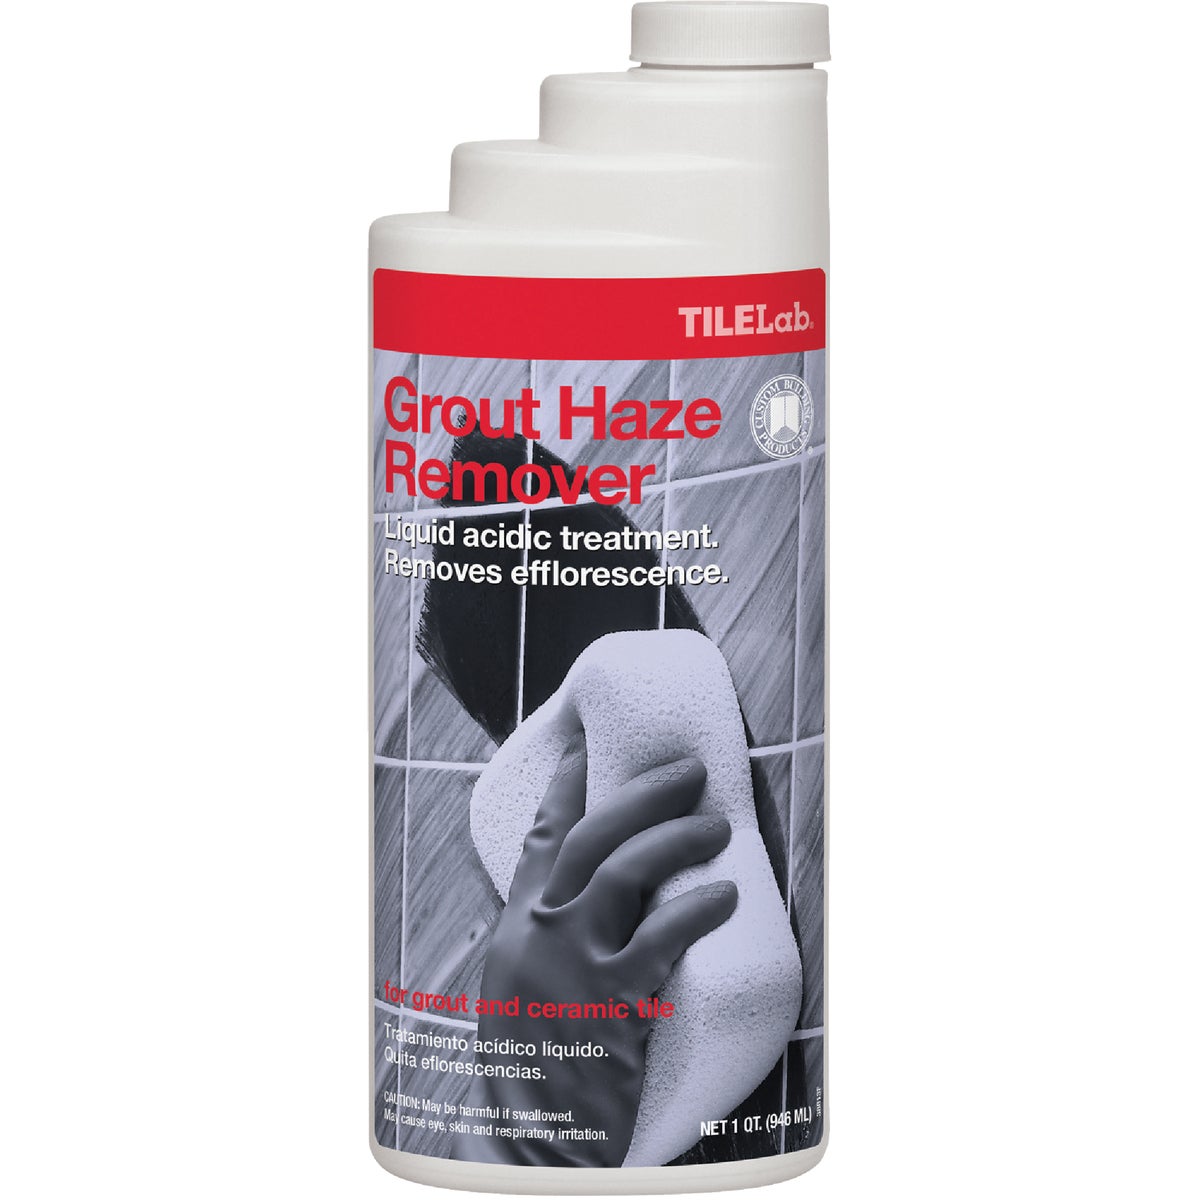 Item 272840, TileLab grout haze remover is premixed, ready-to-use mild acidic solution.